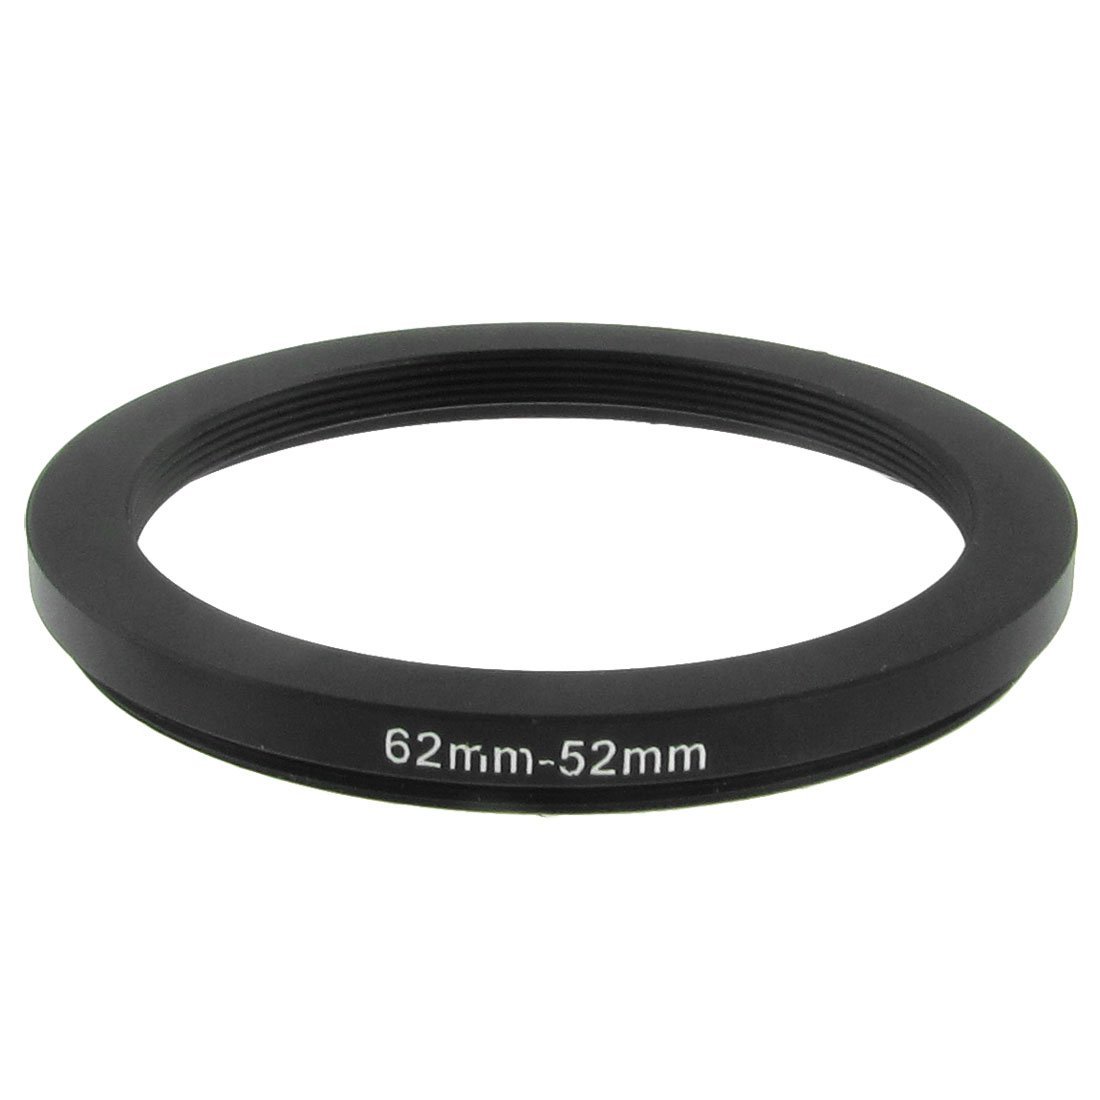 EDT-62mm-52mm 62   52        